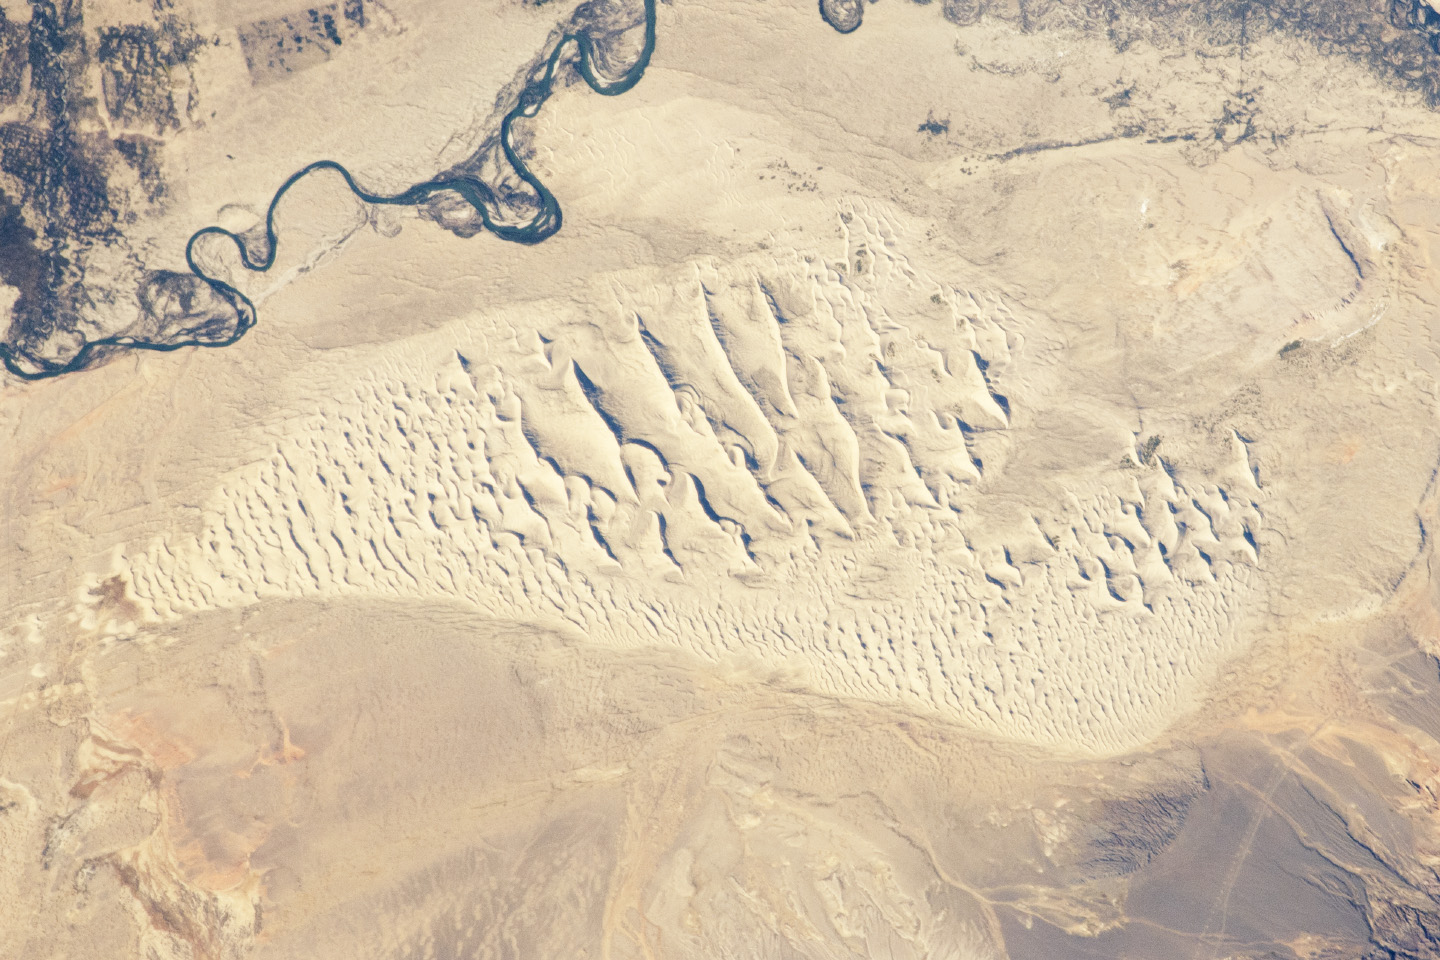 Sand Dunes, Junggar Basin, Northwestern China - related image preview